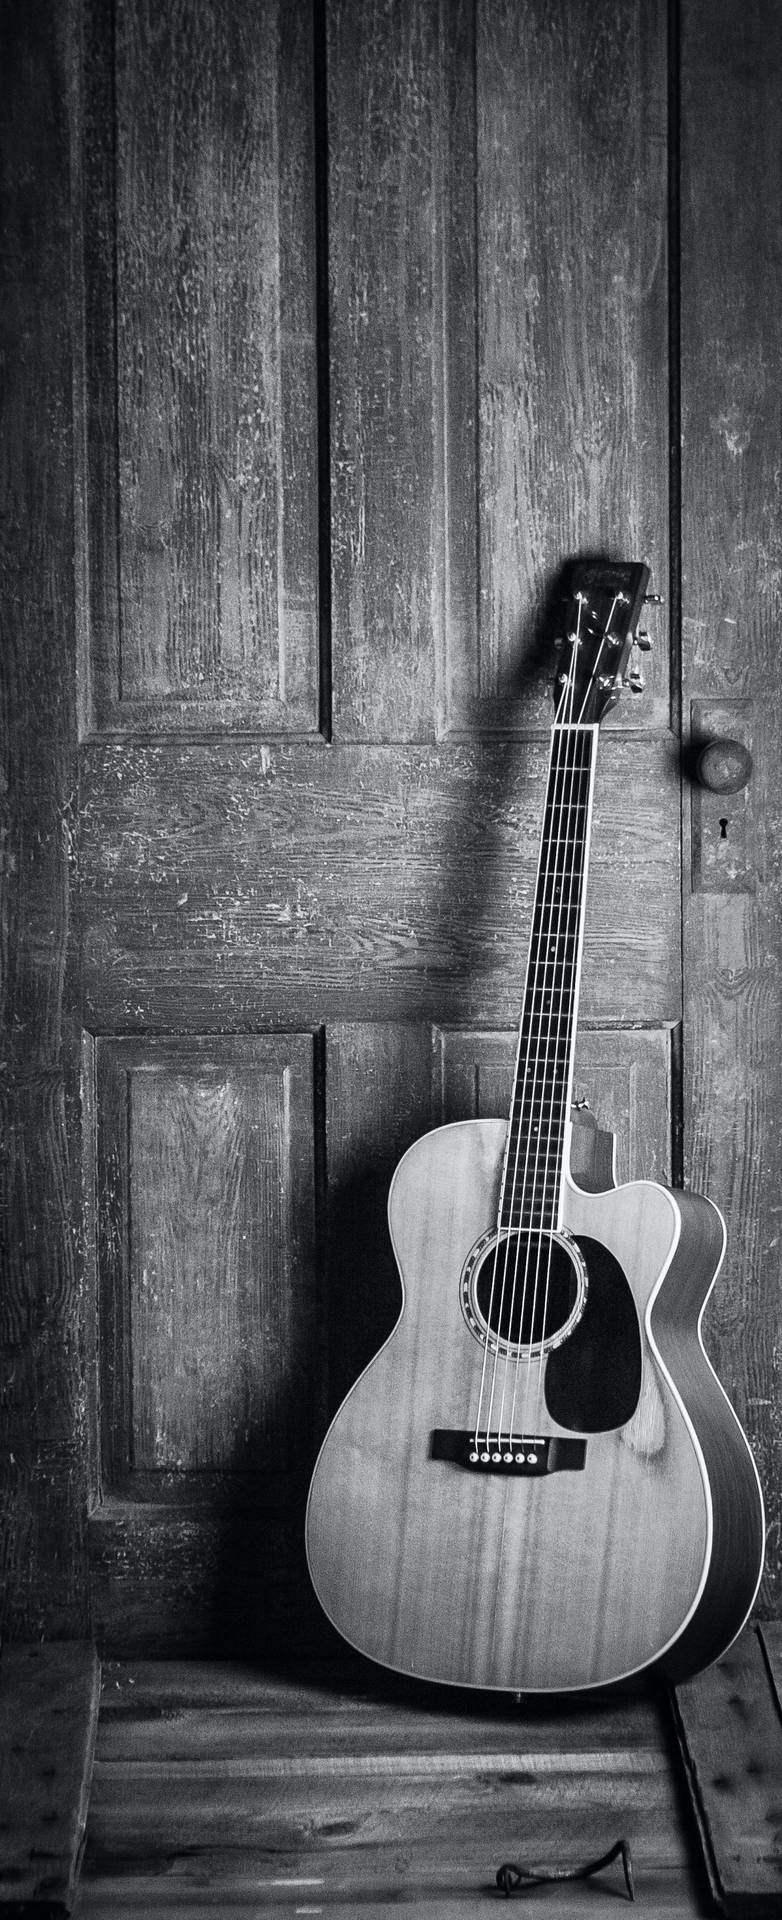 Coolest Iphone Black And White Guitar Background